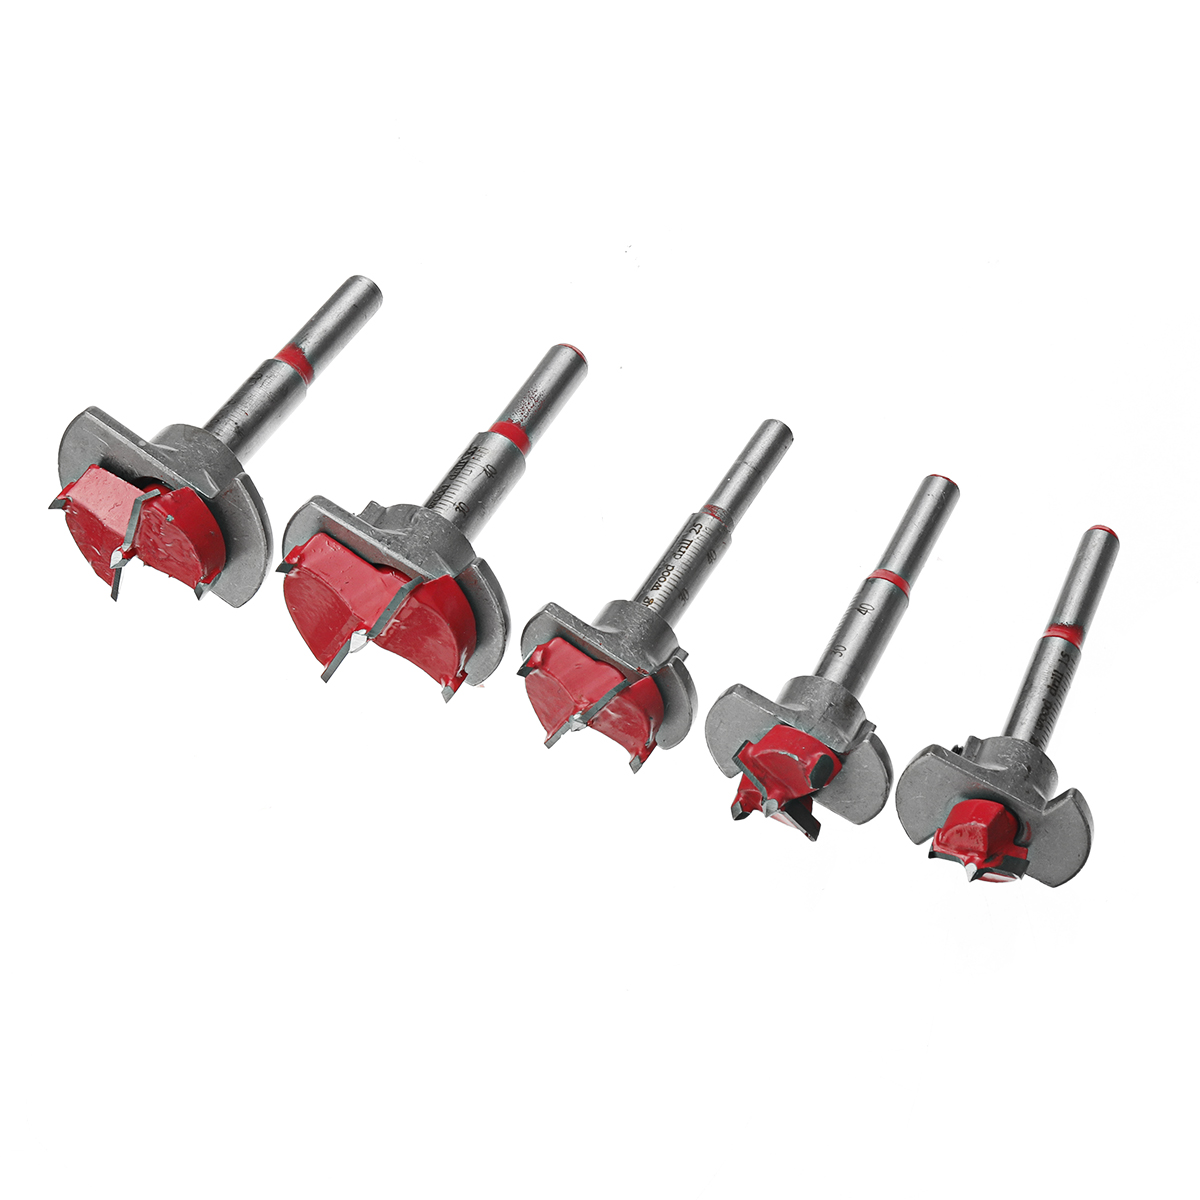 7pcs-Blue-or-Red-Woodworking-Hinge-Hole-Opener-Set-Positioning-Hole-Saw-Cutter-Drill-Bits-1615475-4